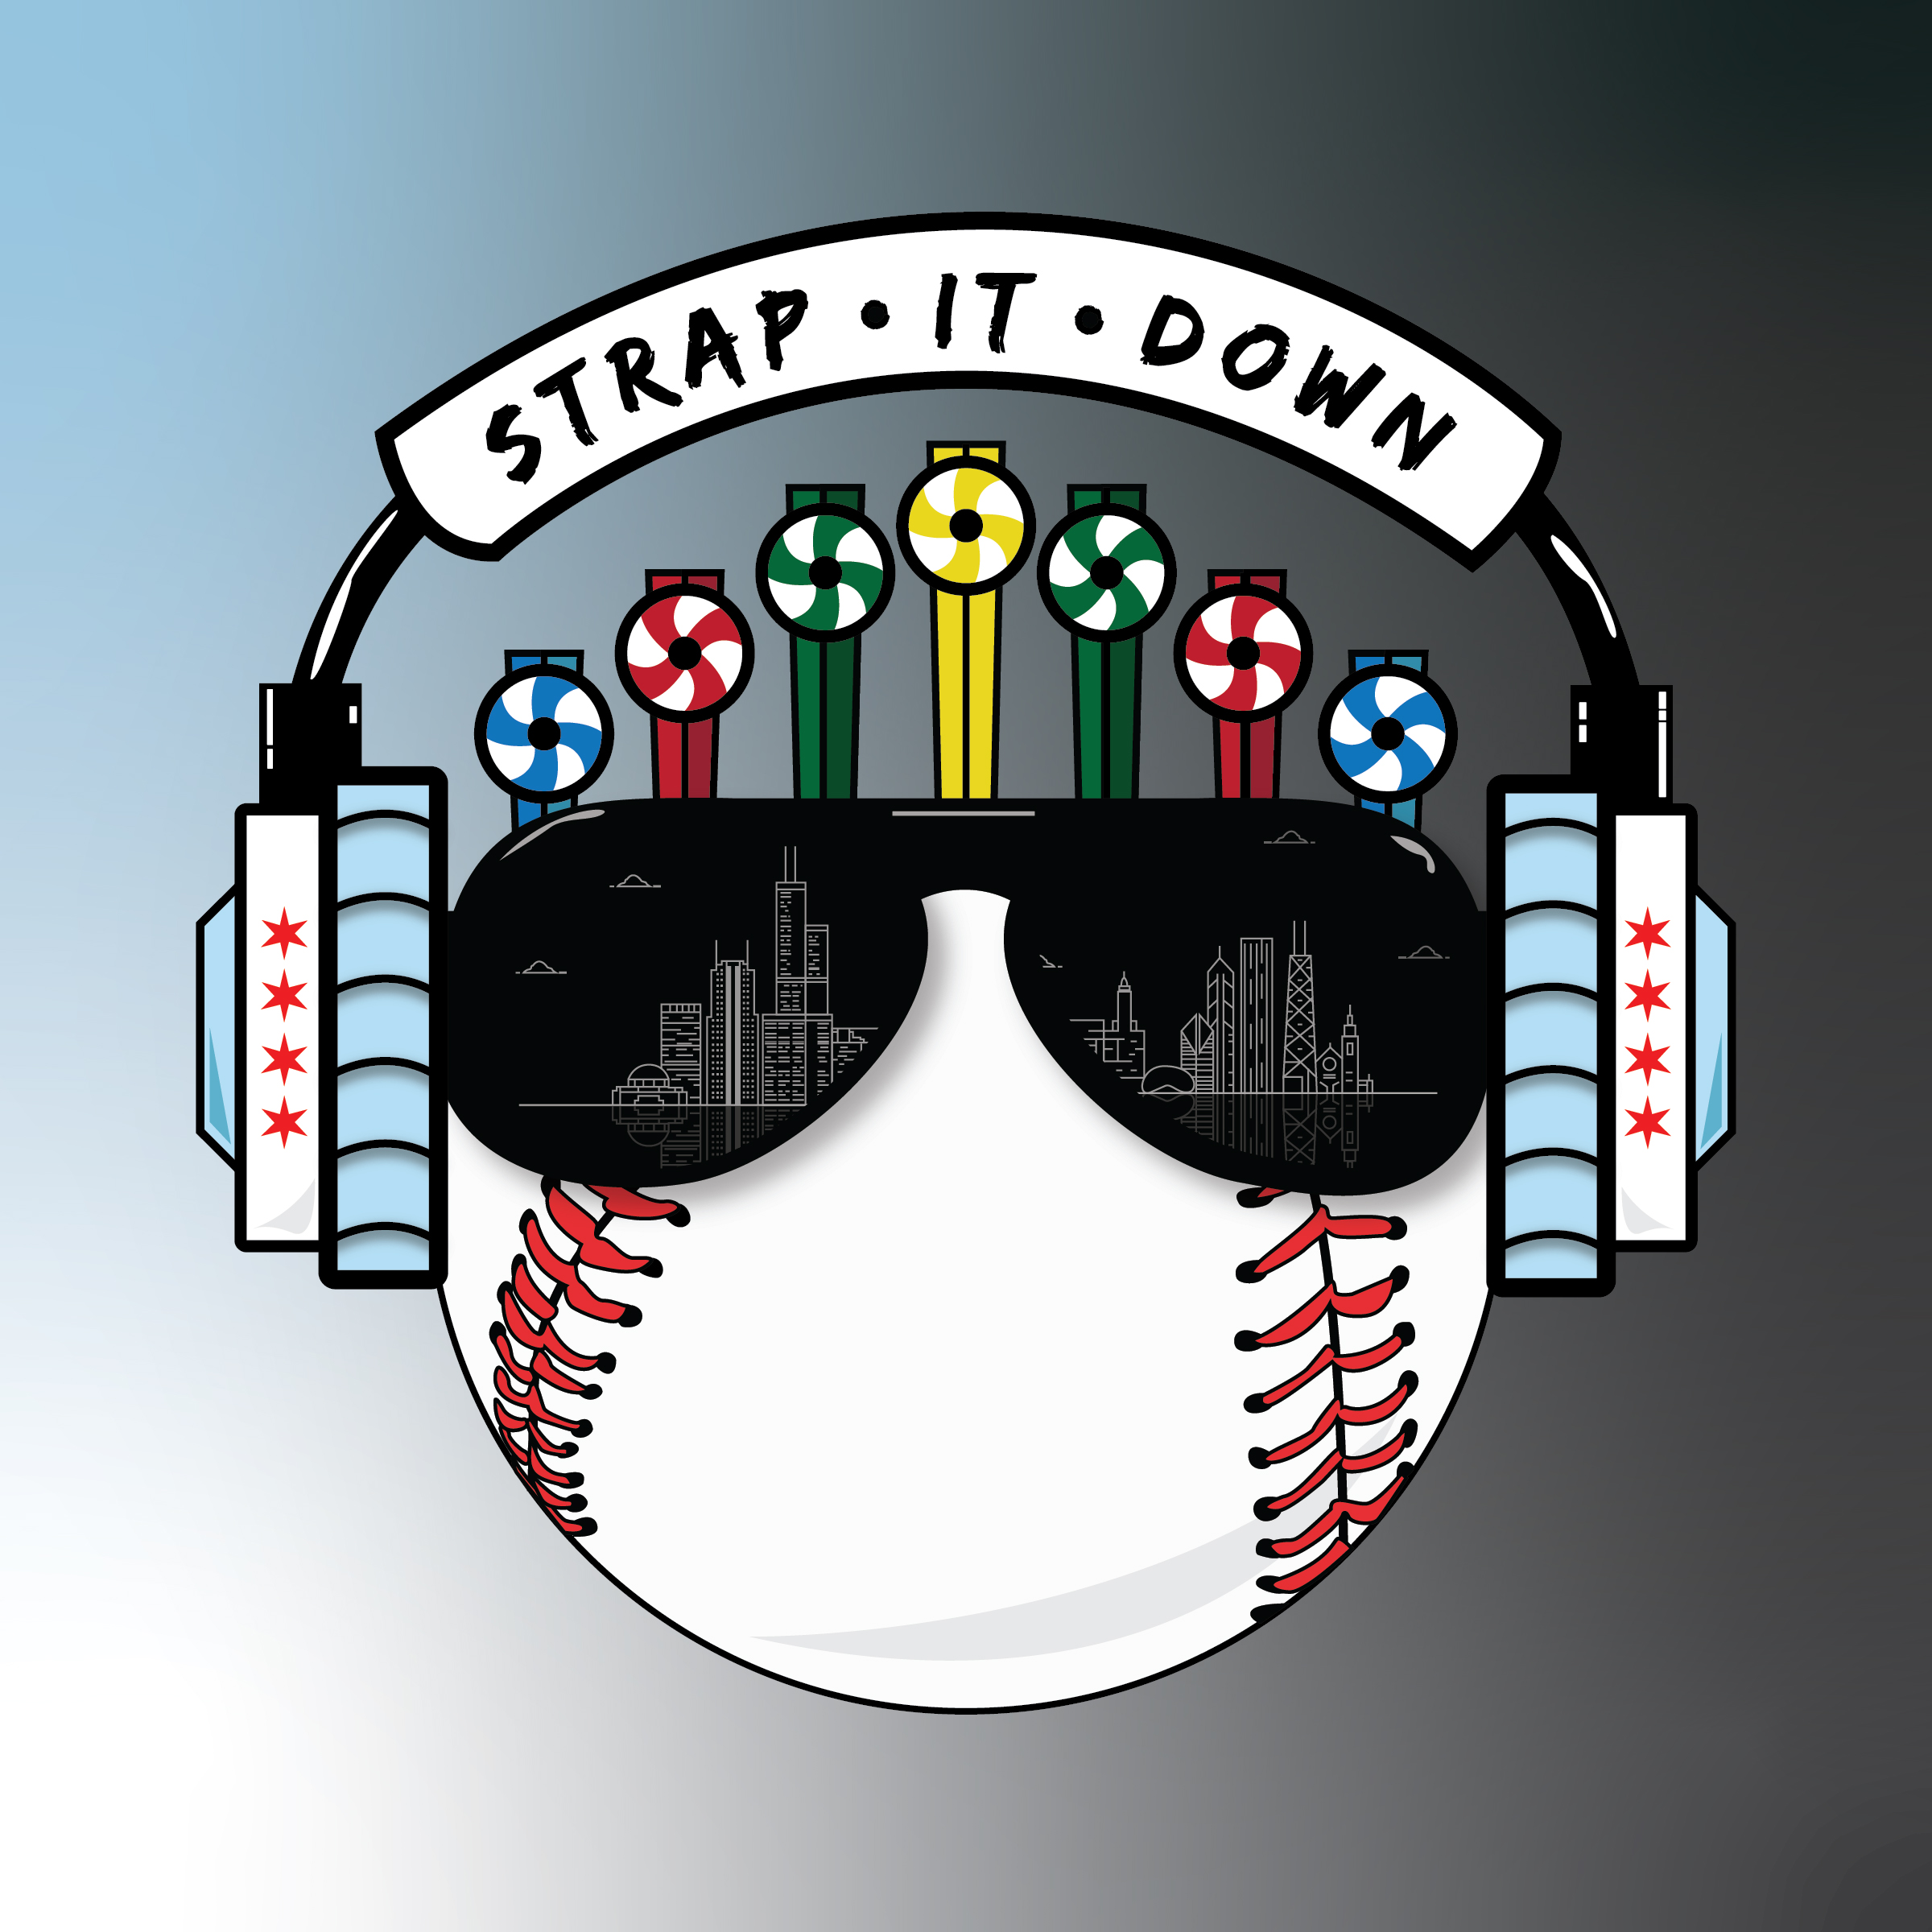 Show artwork for Strap it Down - White Sox Therapy